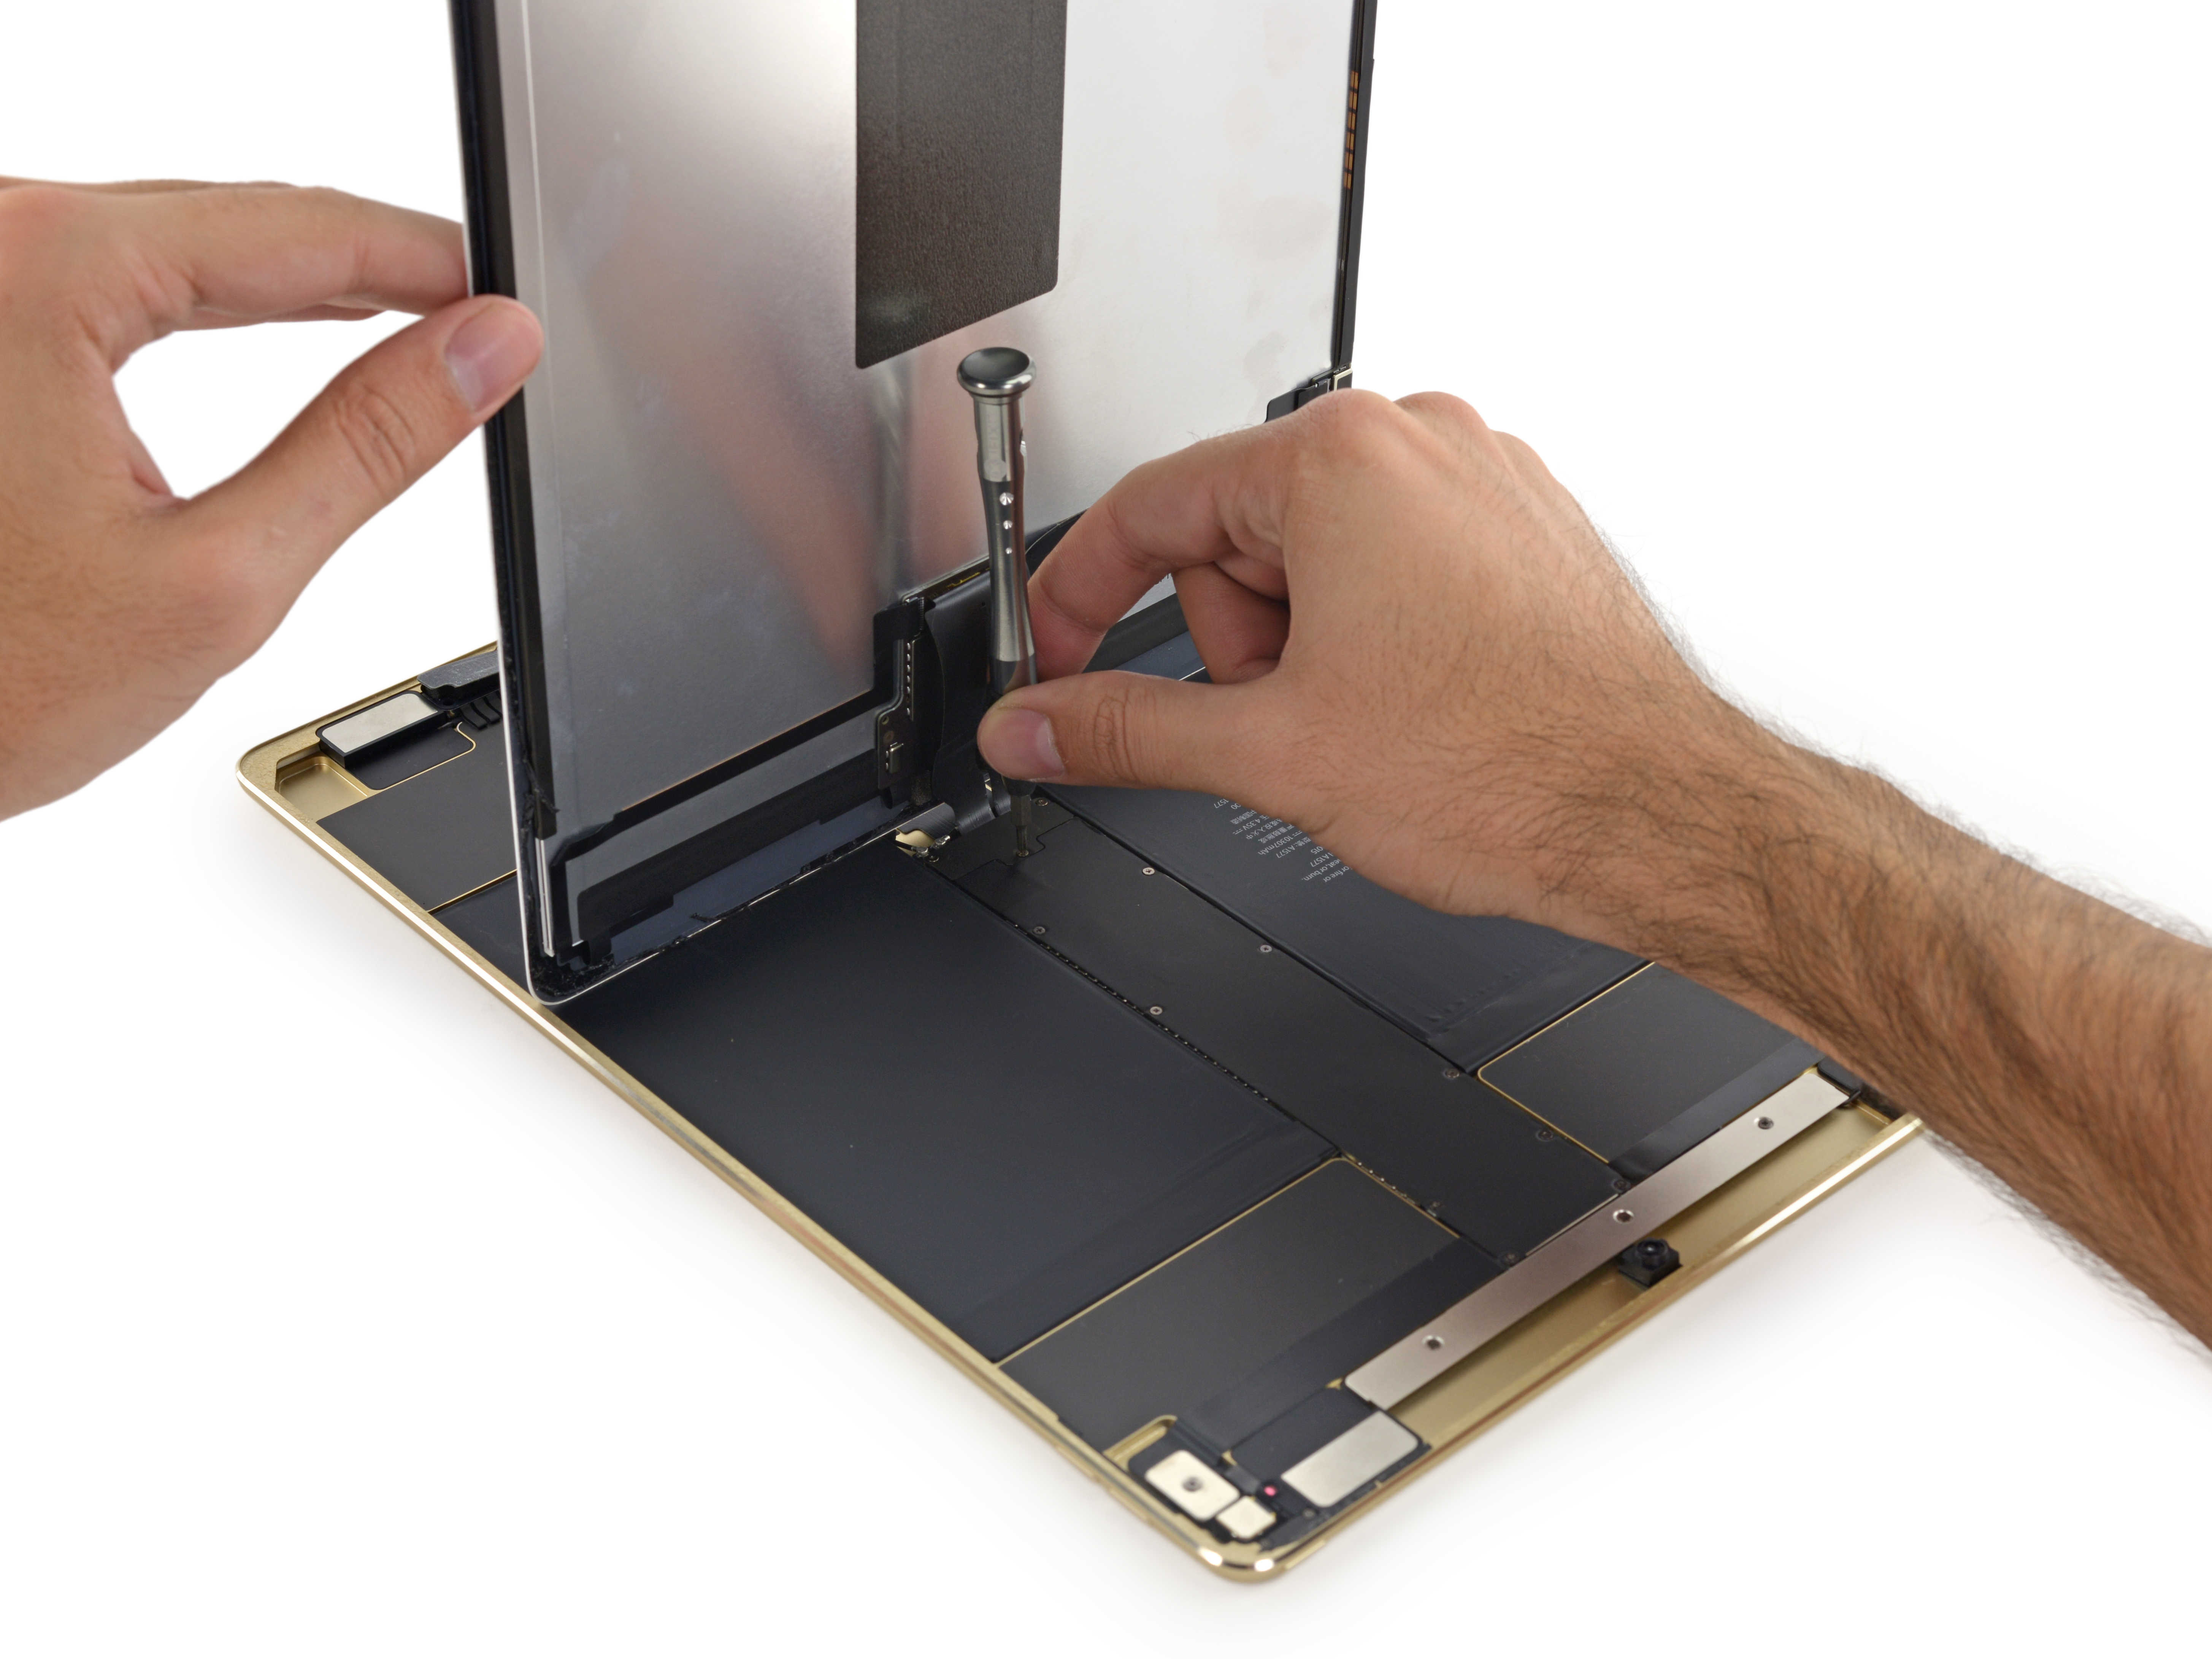 Inside of iPad Pro contains way more foam than you'd